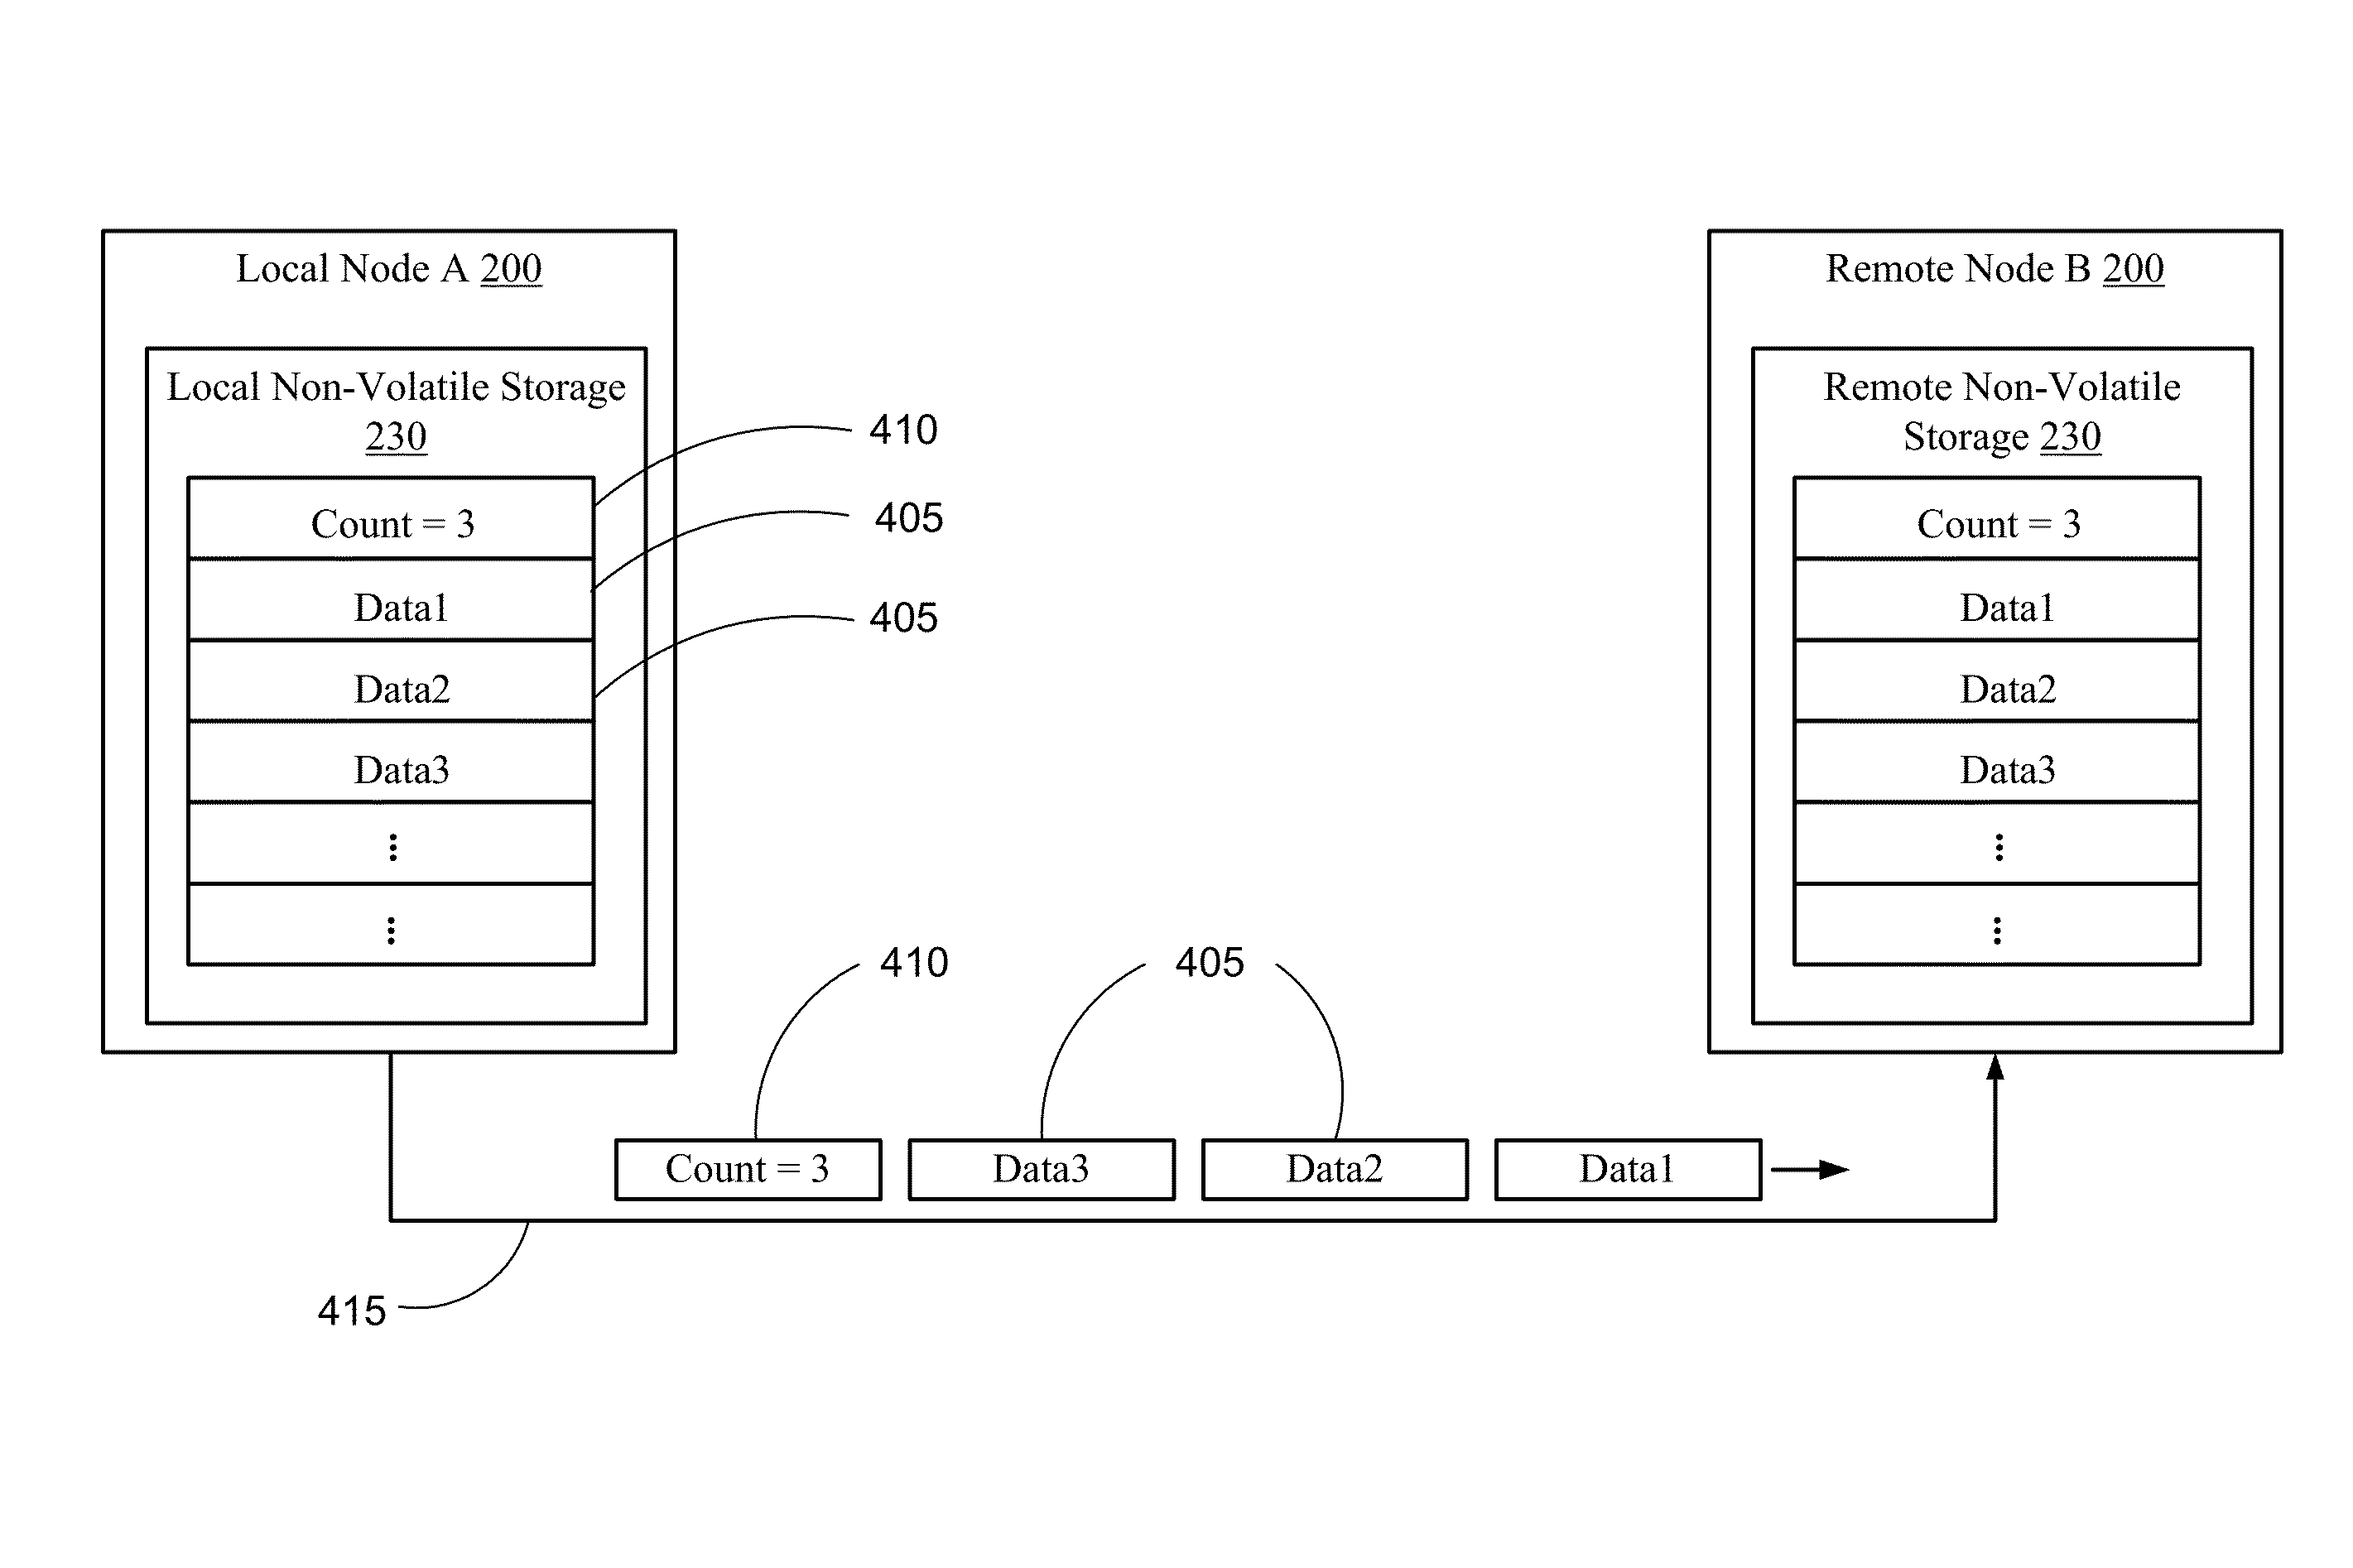 Coalescing metadata for mirroring to a remote node in a cluster storage system